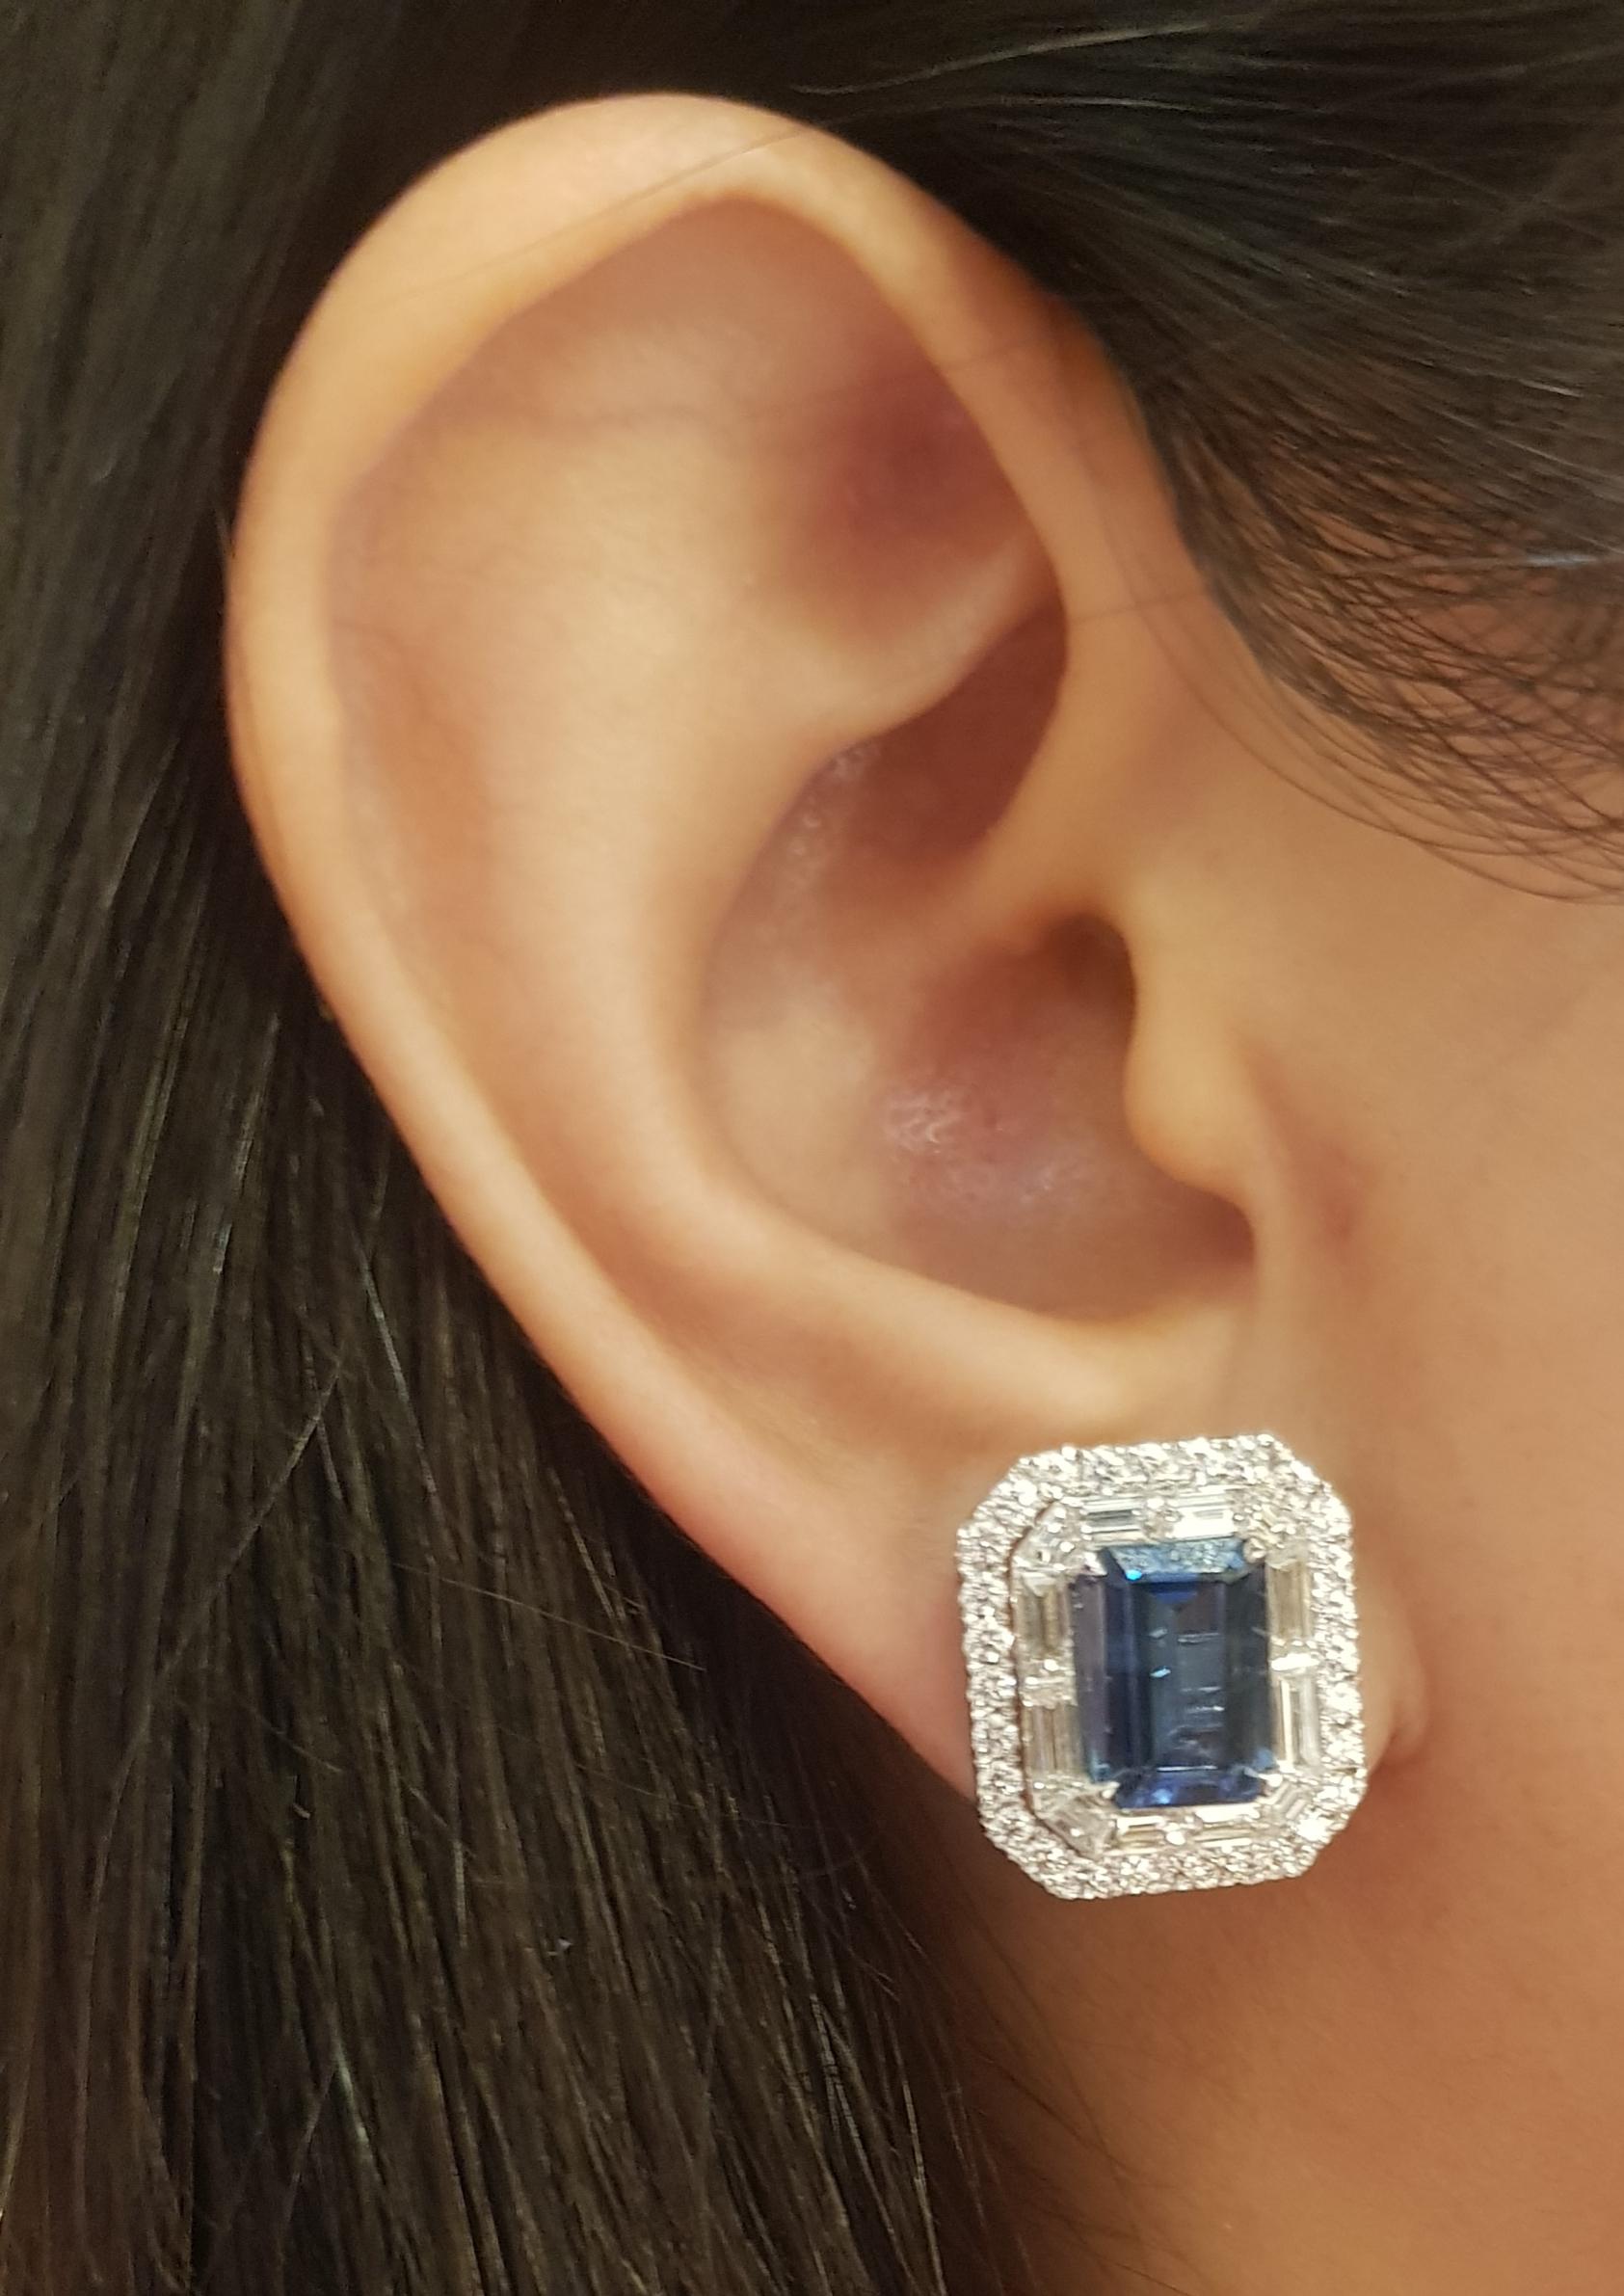 Blue Sapphire 5.84 carats with Diamond 3.07 carats Earrings set in 18K White Gold Settings

Width: 1.5 cm 
Length: 1.7 cm
Total Weight: 13.12 grams

